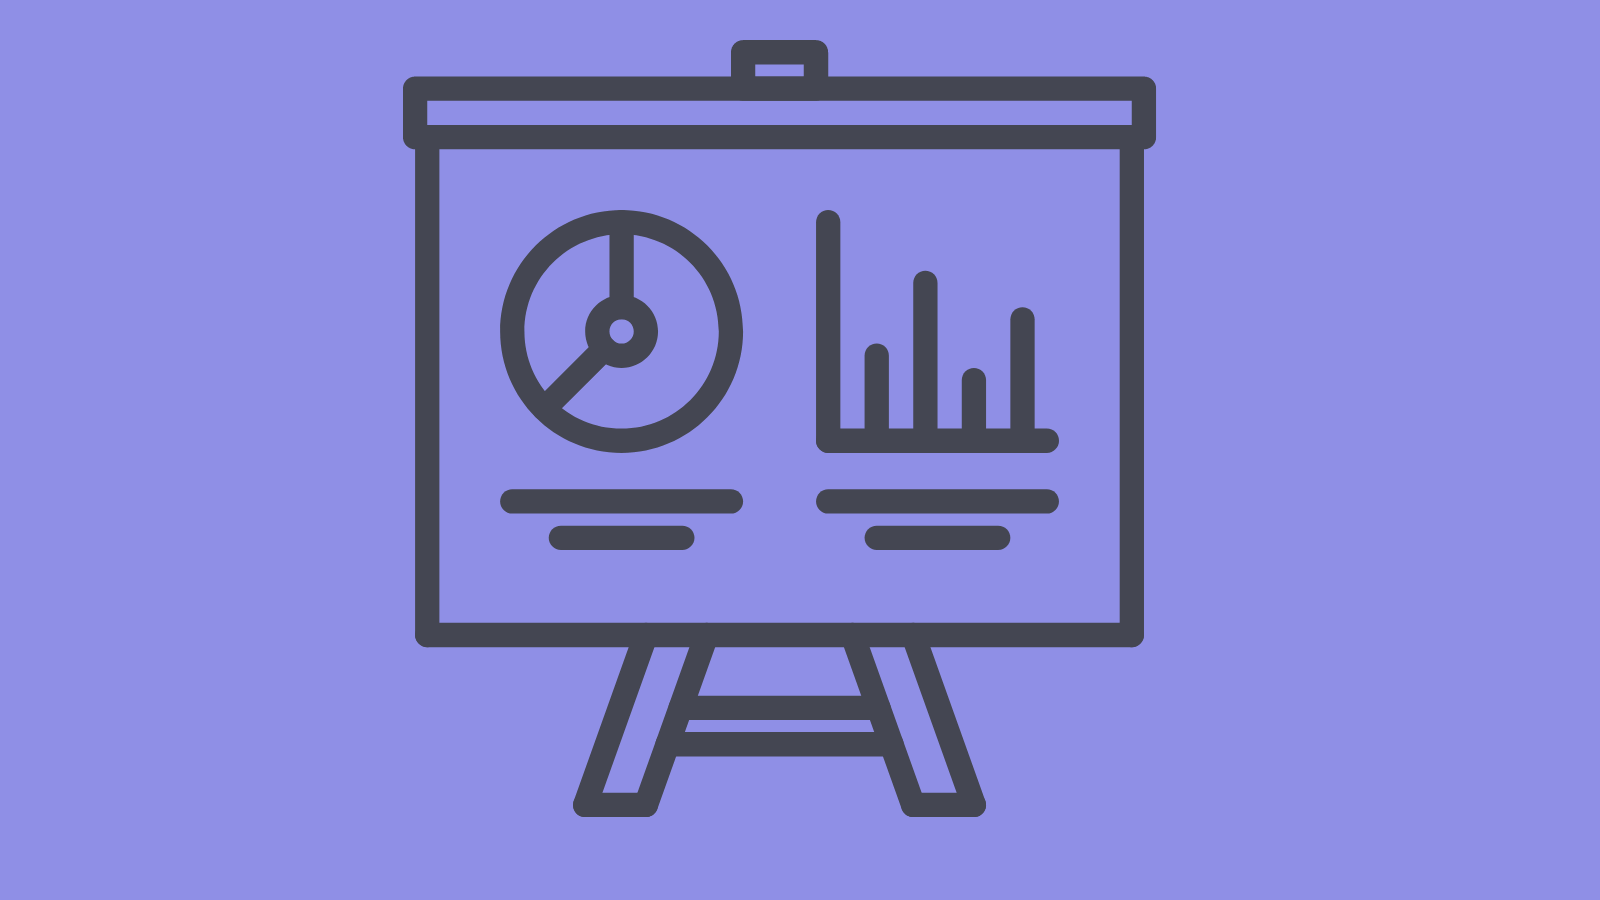 An illustration of a presentation board with various charts on it